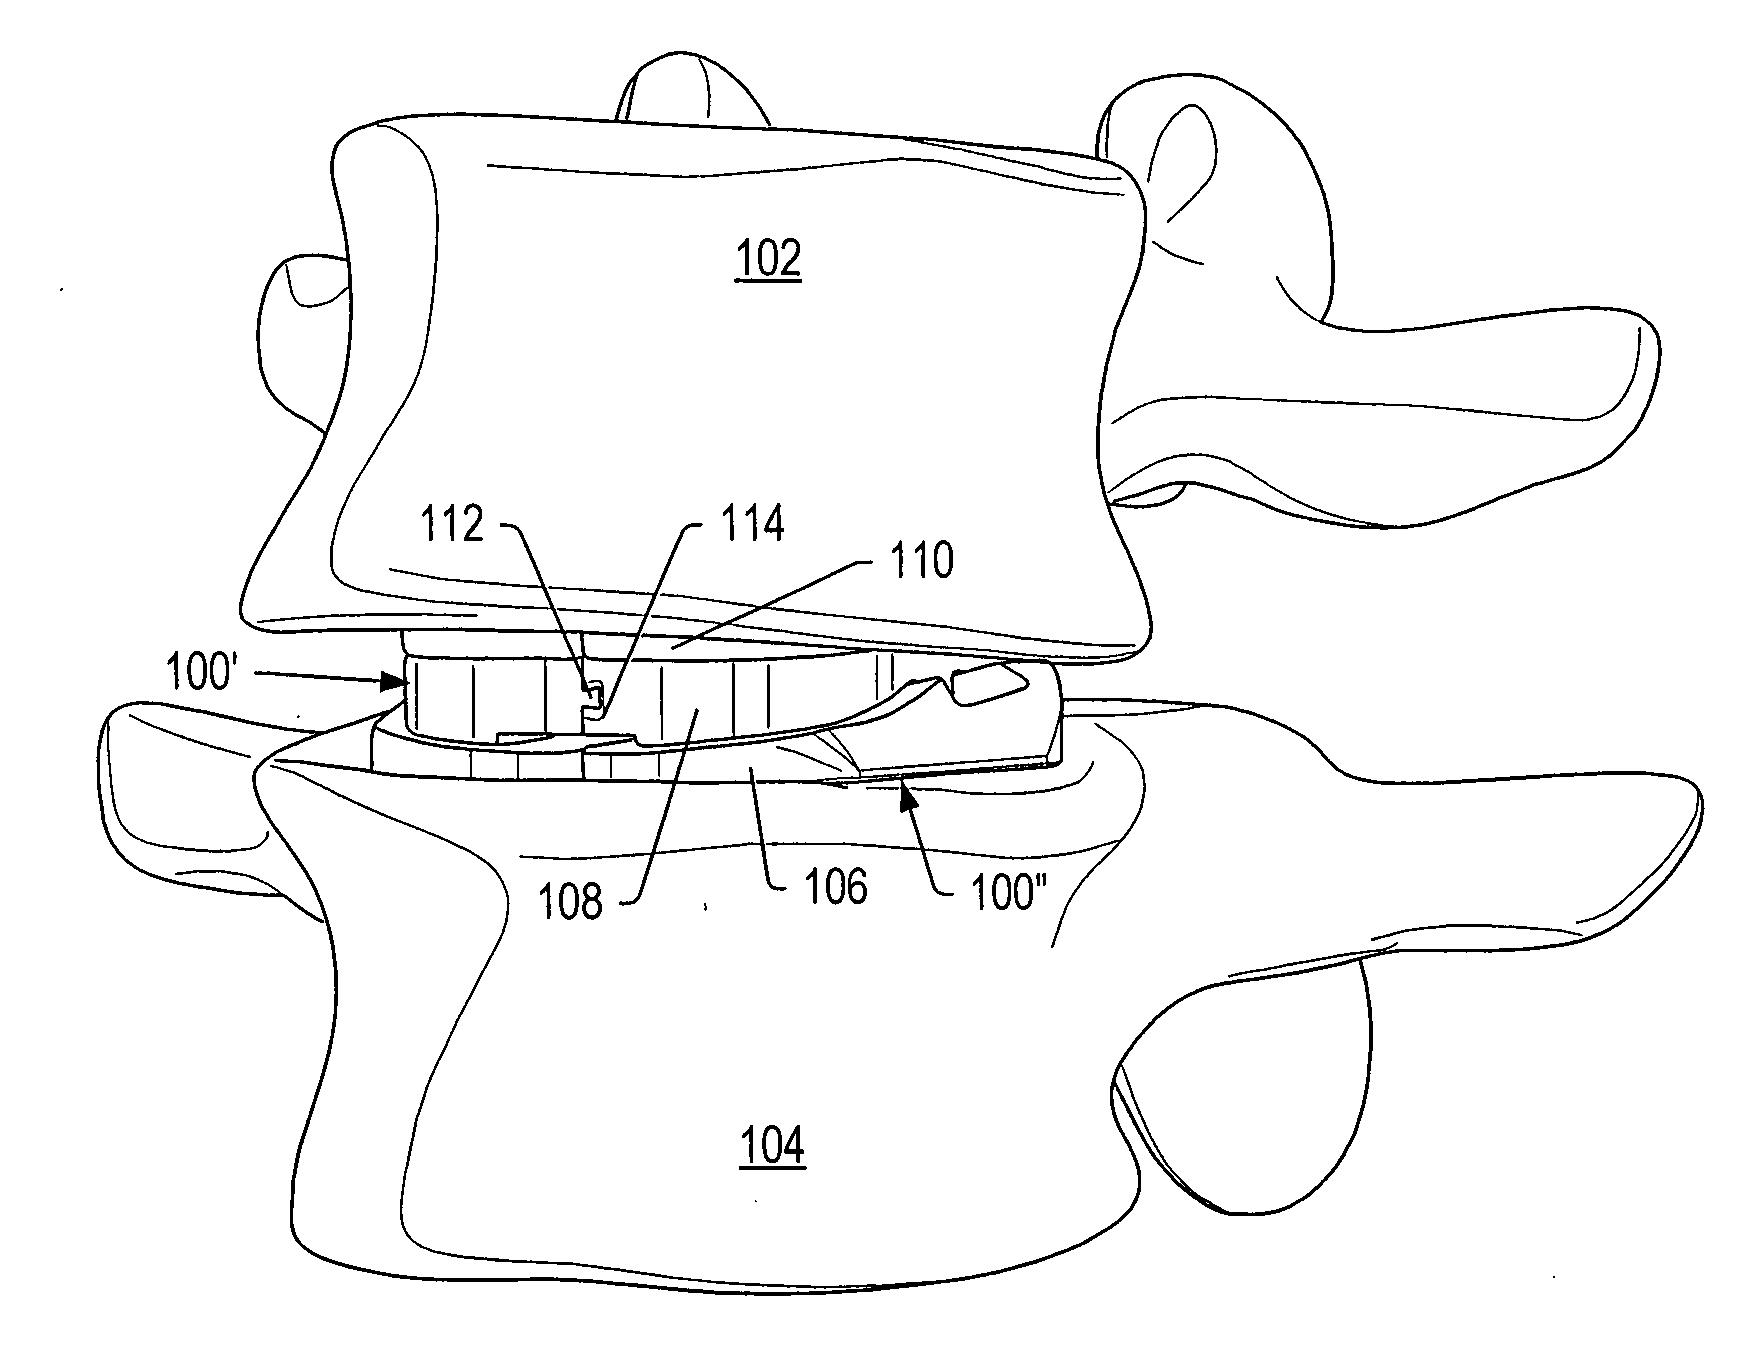 Posterior stabilization system with isolated, dual dampener systems